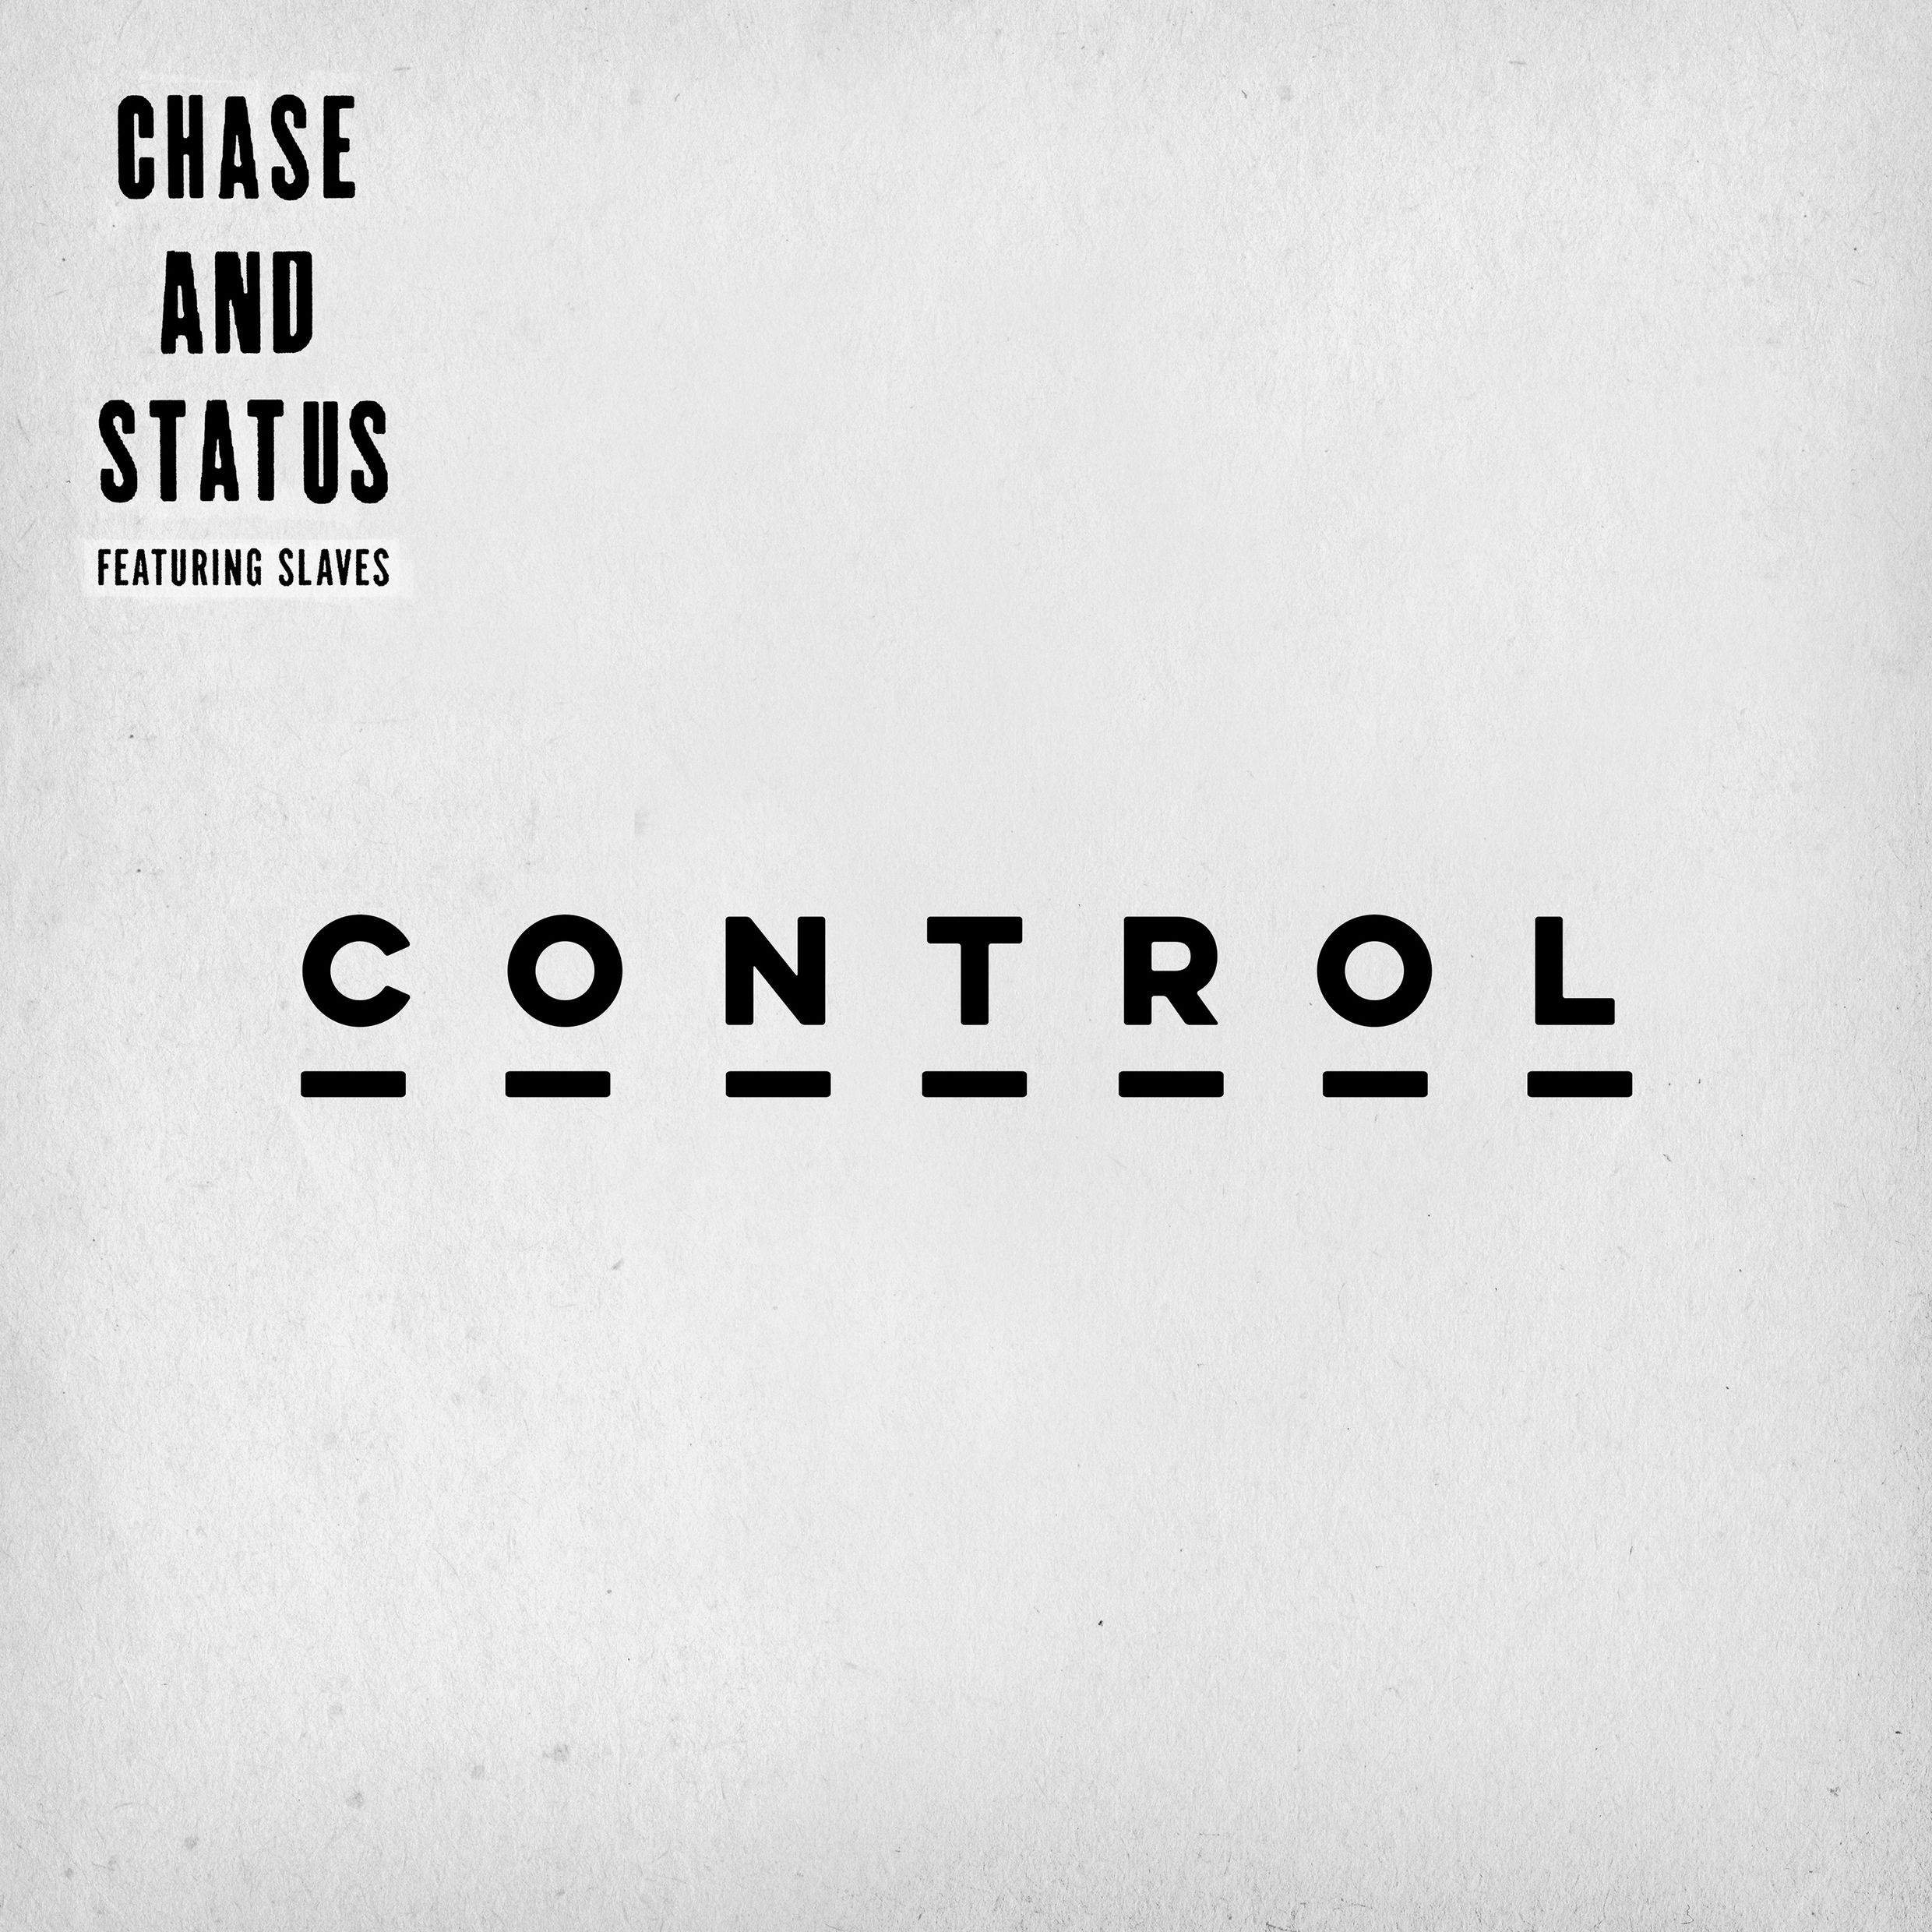 Chase & Status featuring Slaves “Control” music video